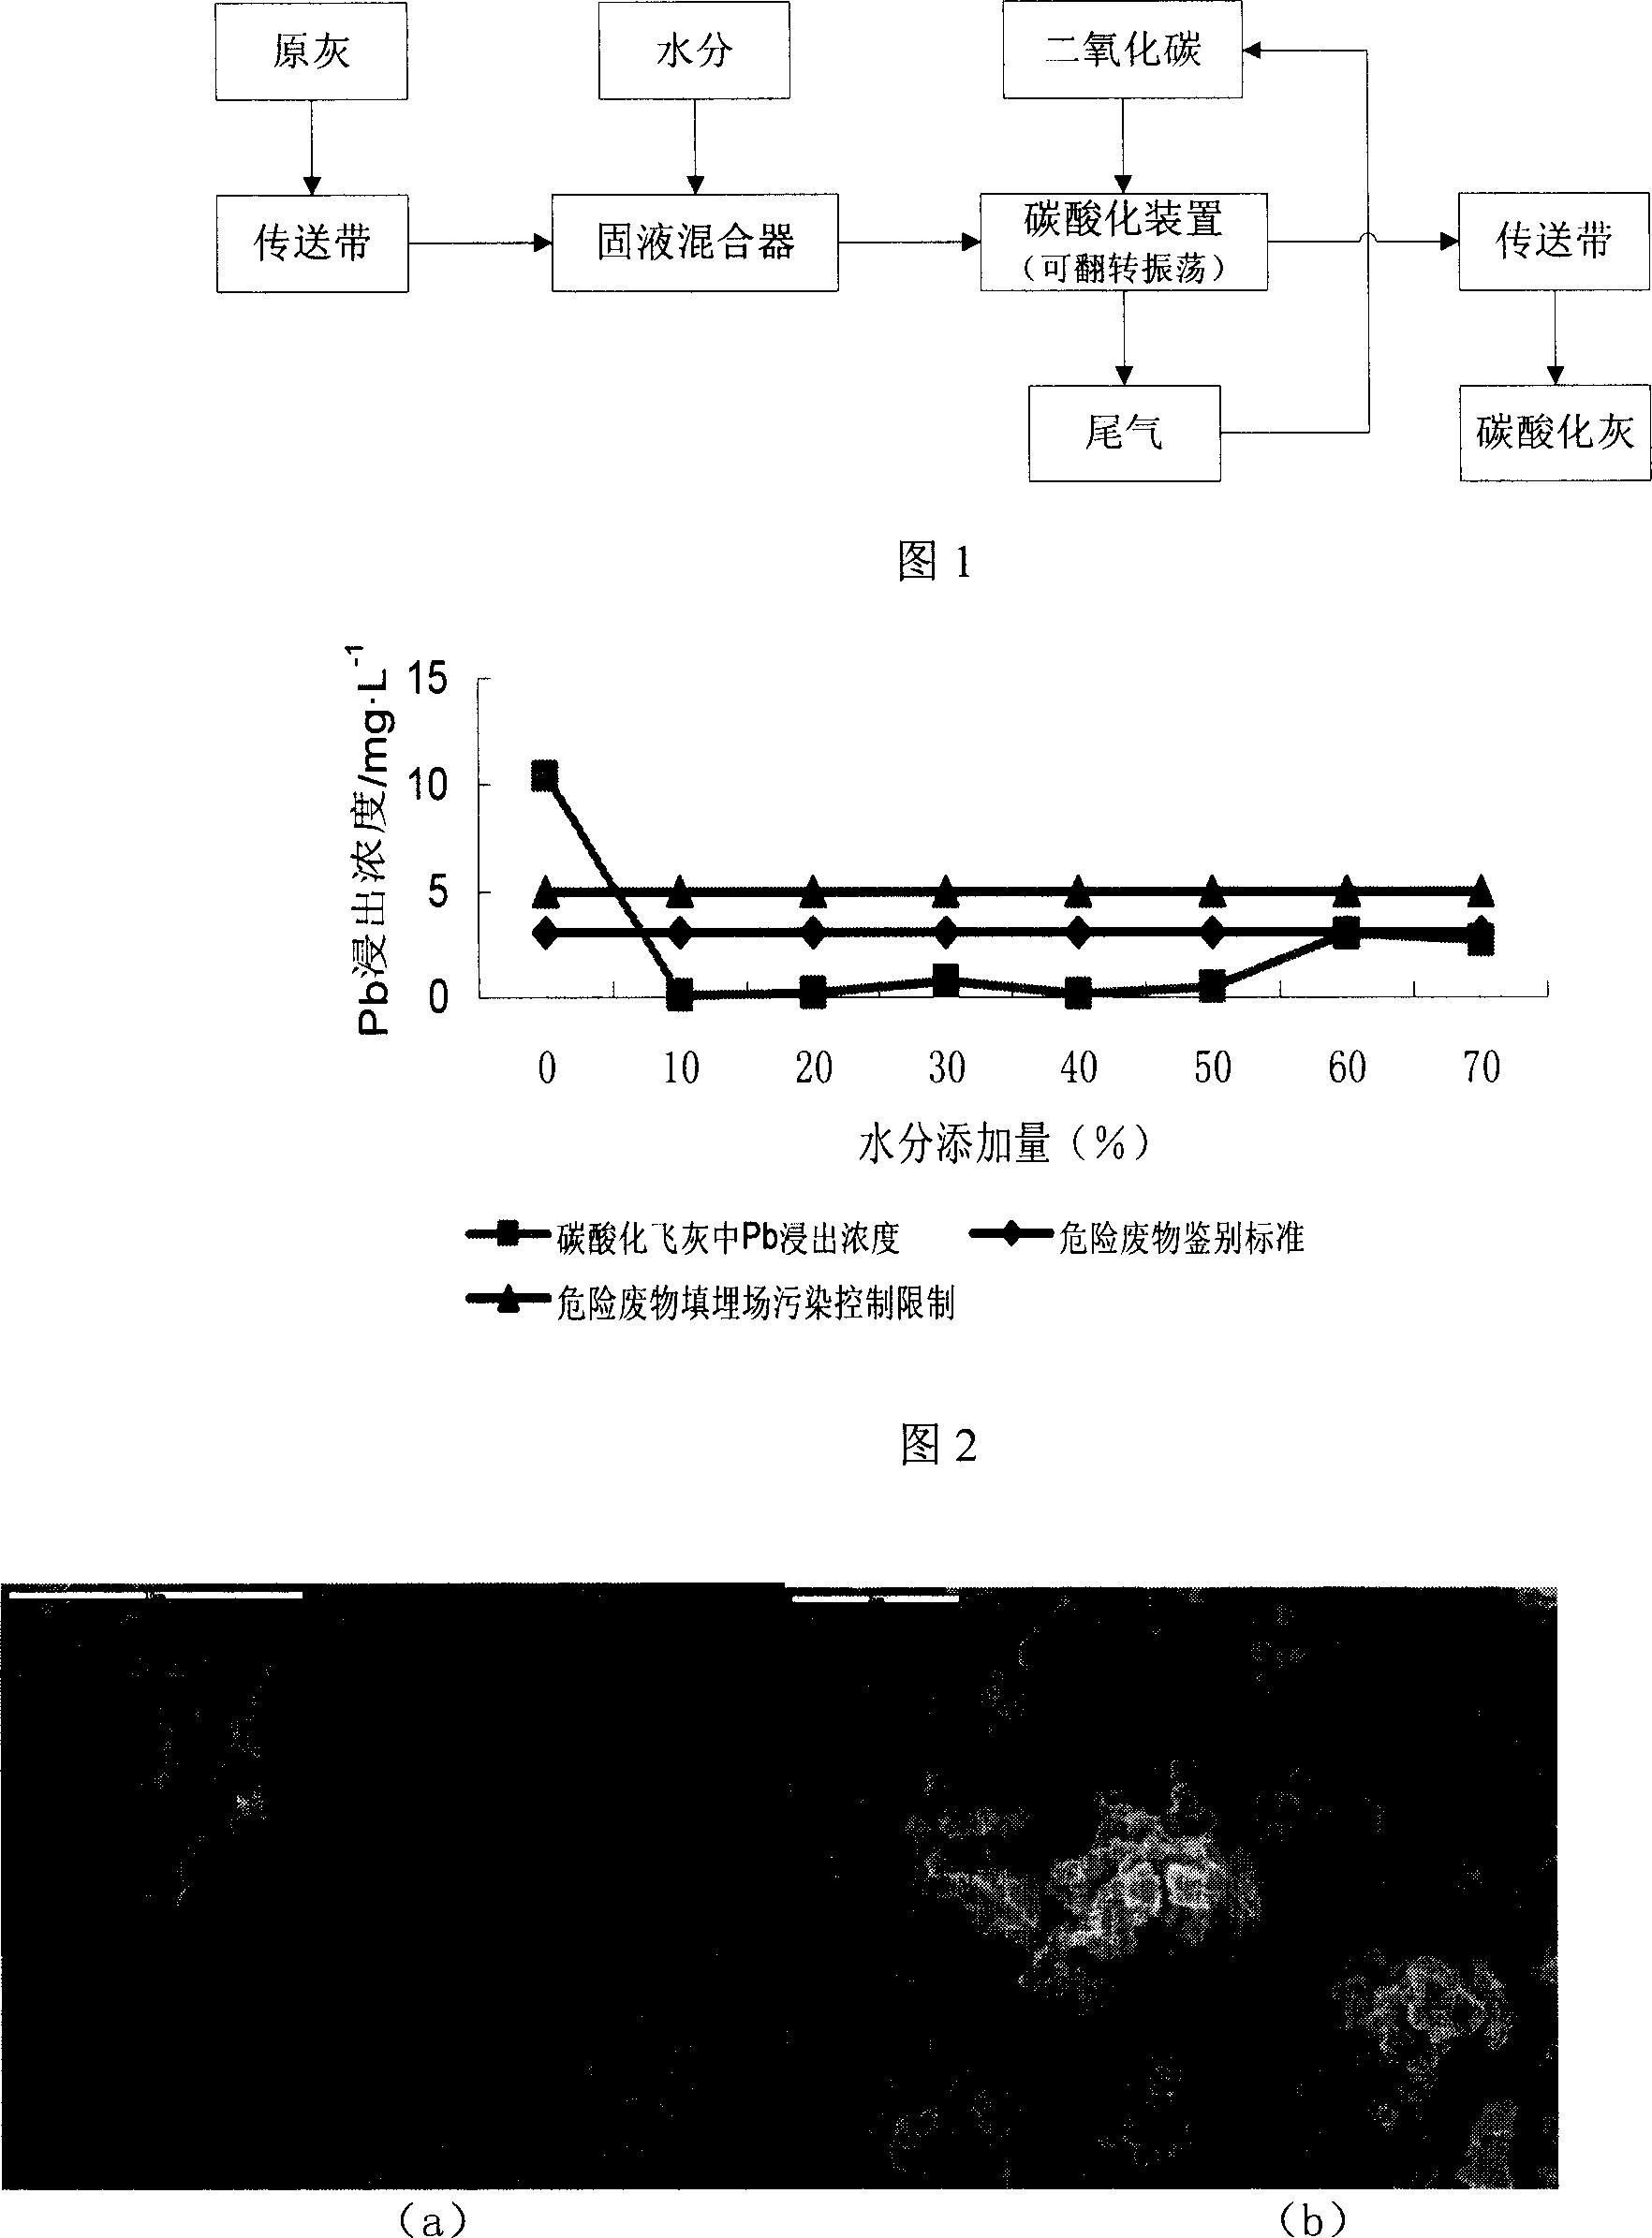 Method for stabilizing treatment of refuse burning fly ash by using accelerated carbonation process